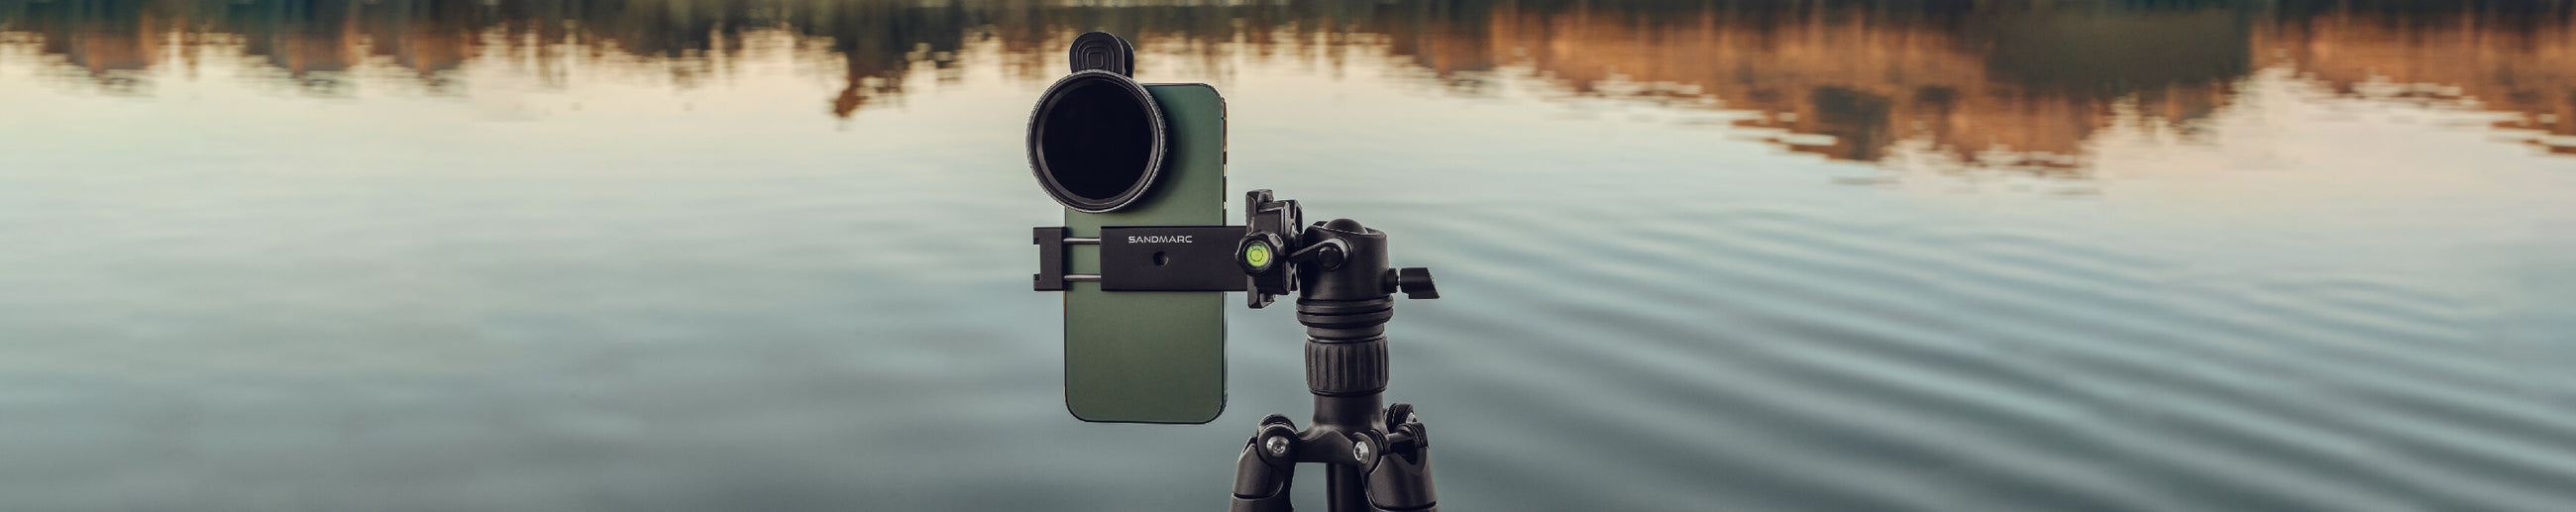 iPhone 13 Pro Max Accessories, Lenses, Tripod, Filters, Rig, Car Mount and more